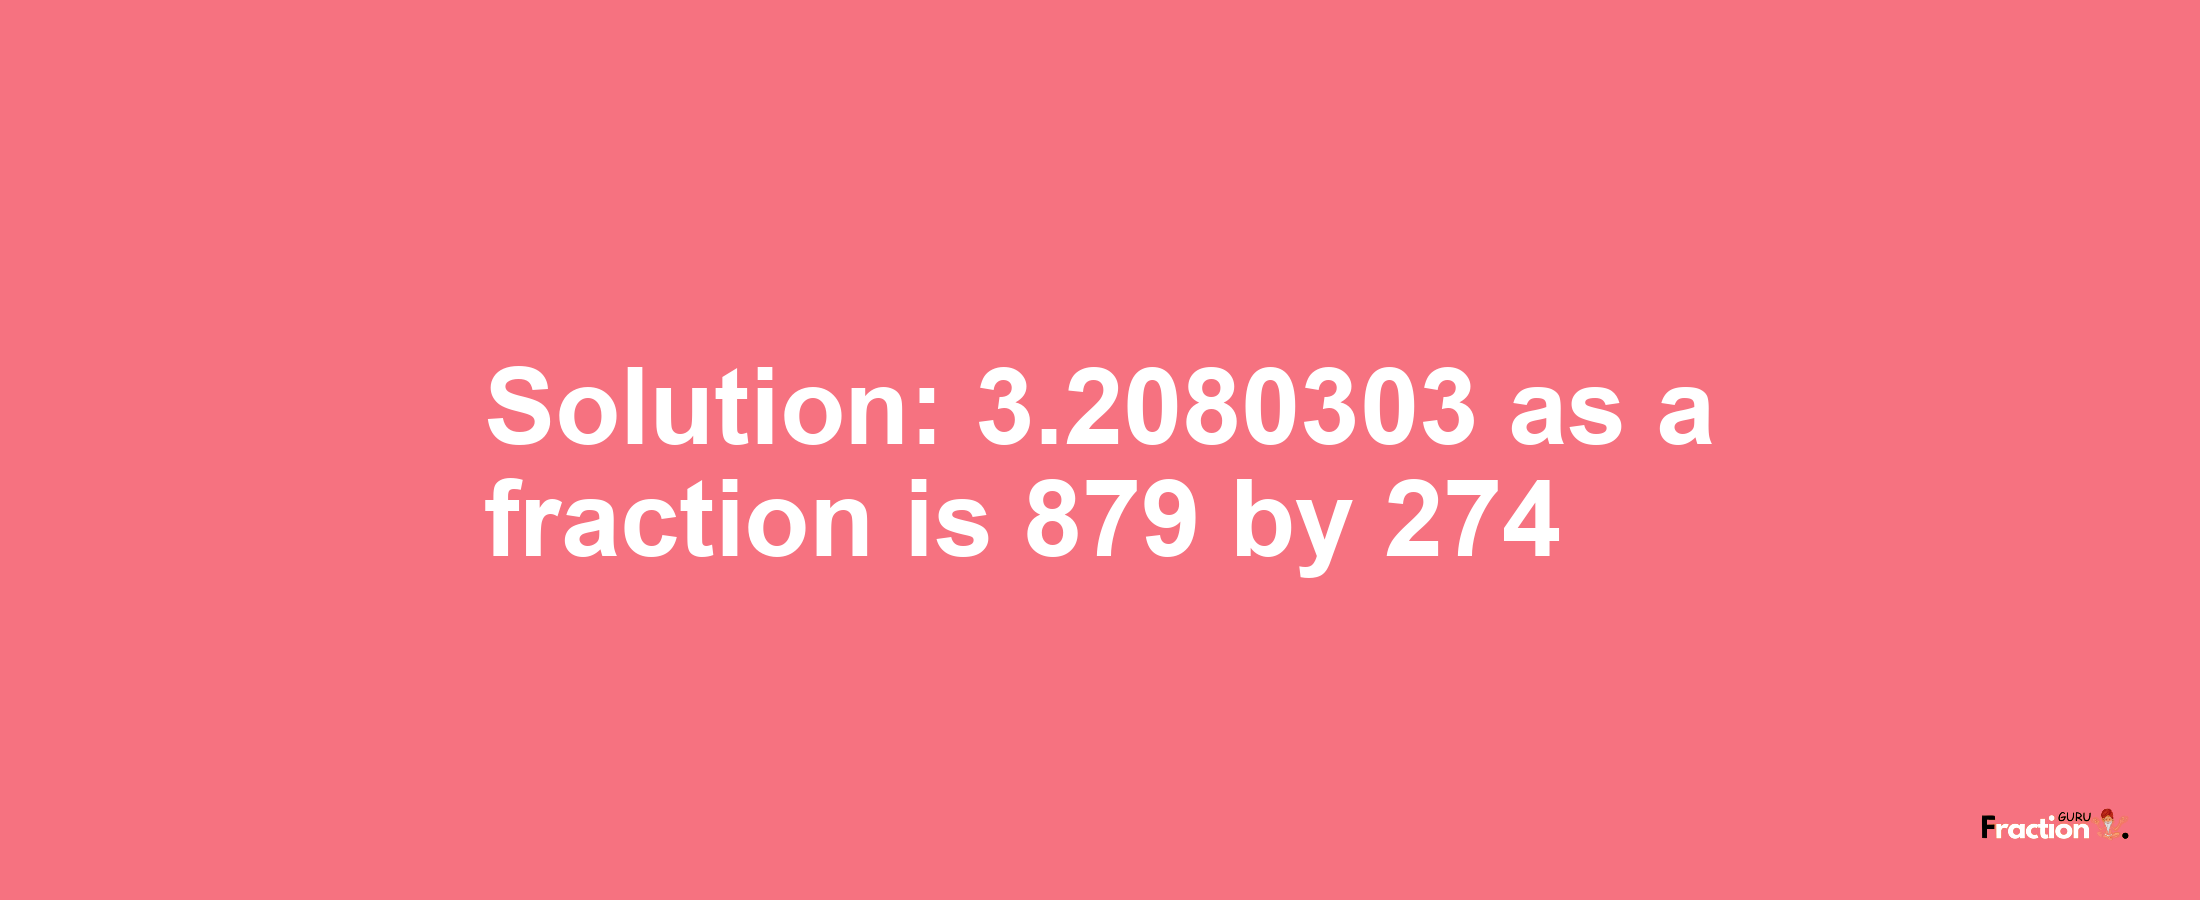 Solution:3.2080303 as a fraction is 879/274